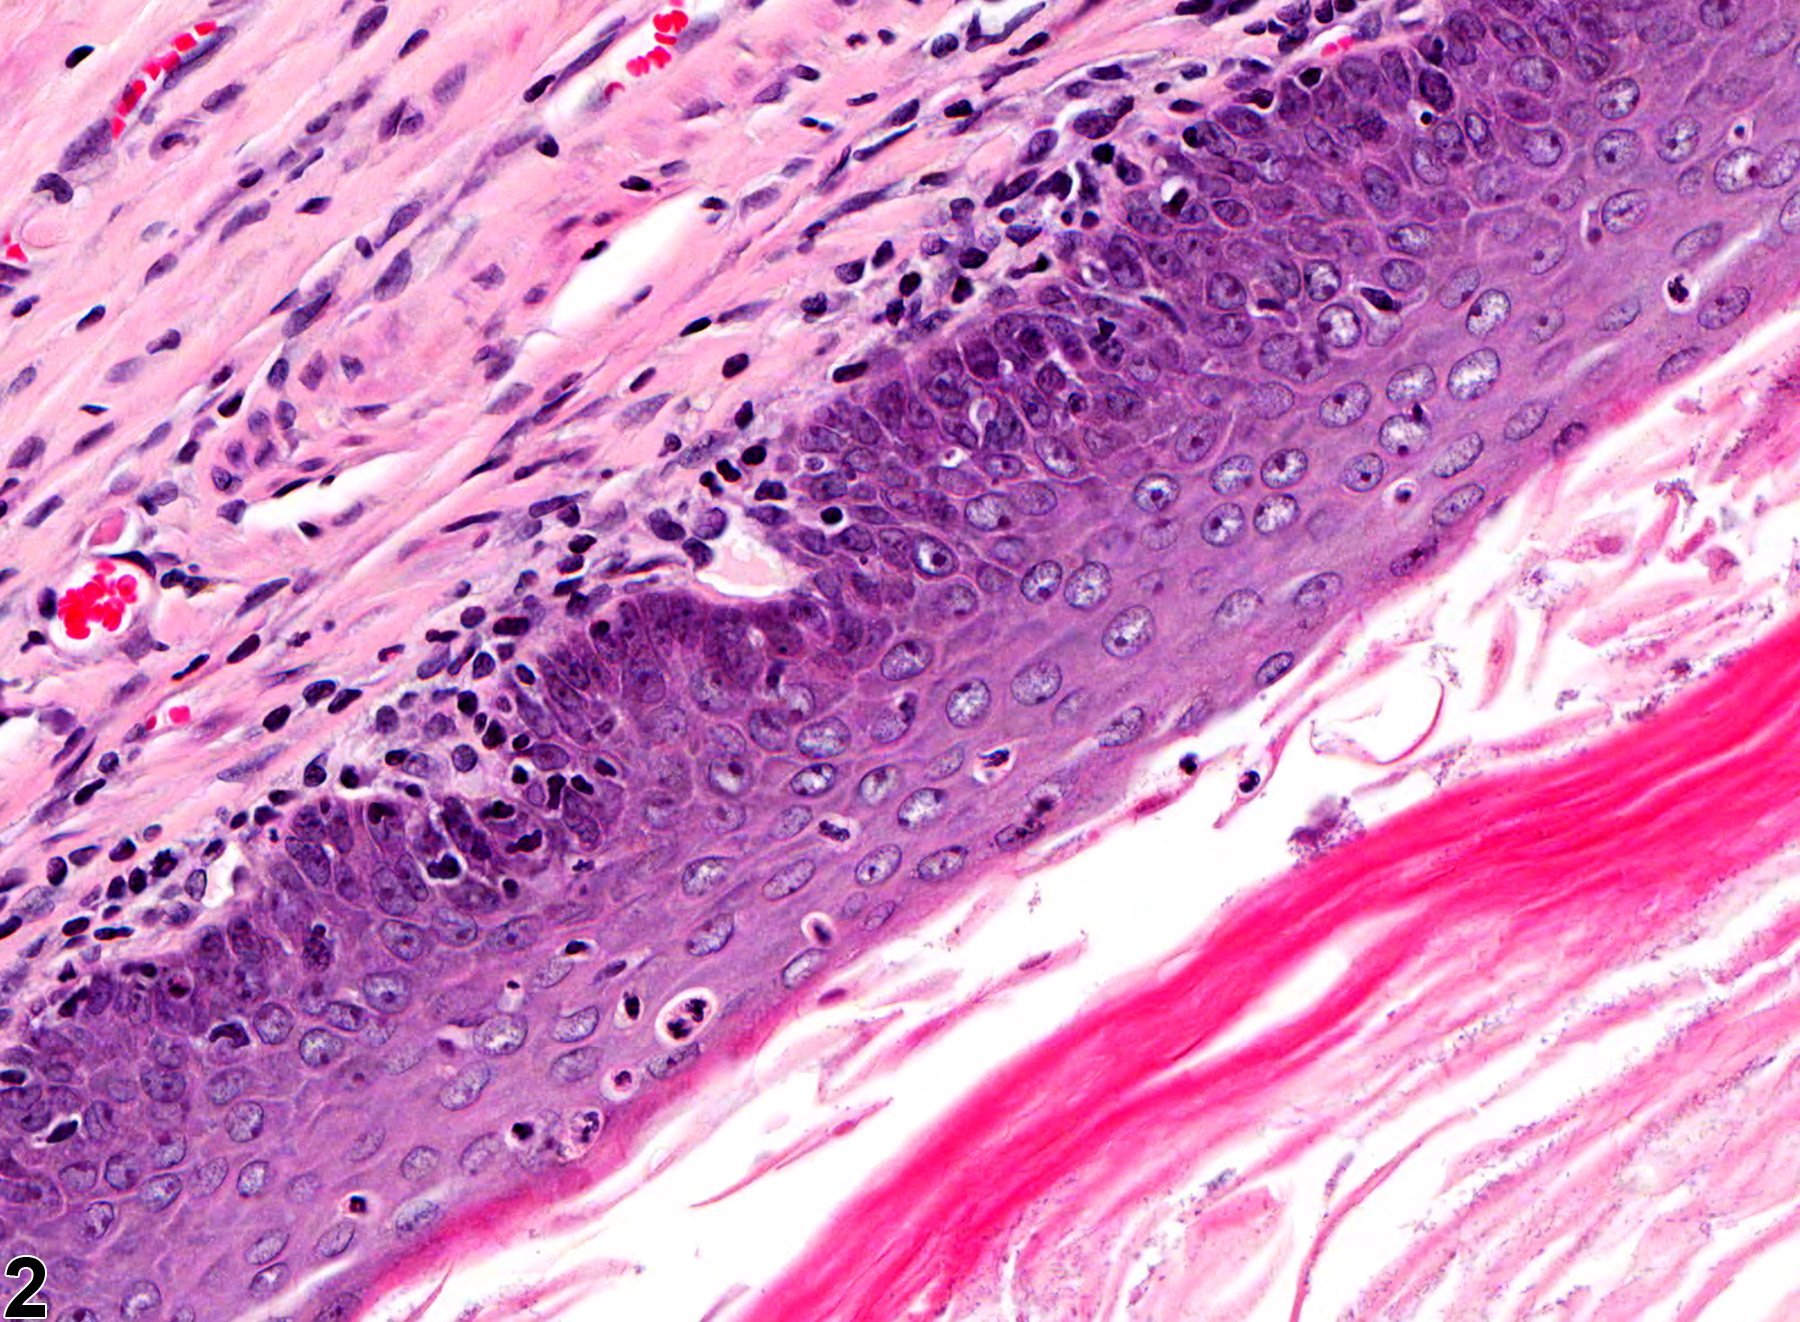 Image of cyst, squamous in the uterus from a female F344/N rat in a chronic study